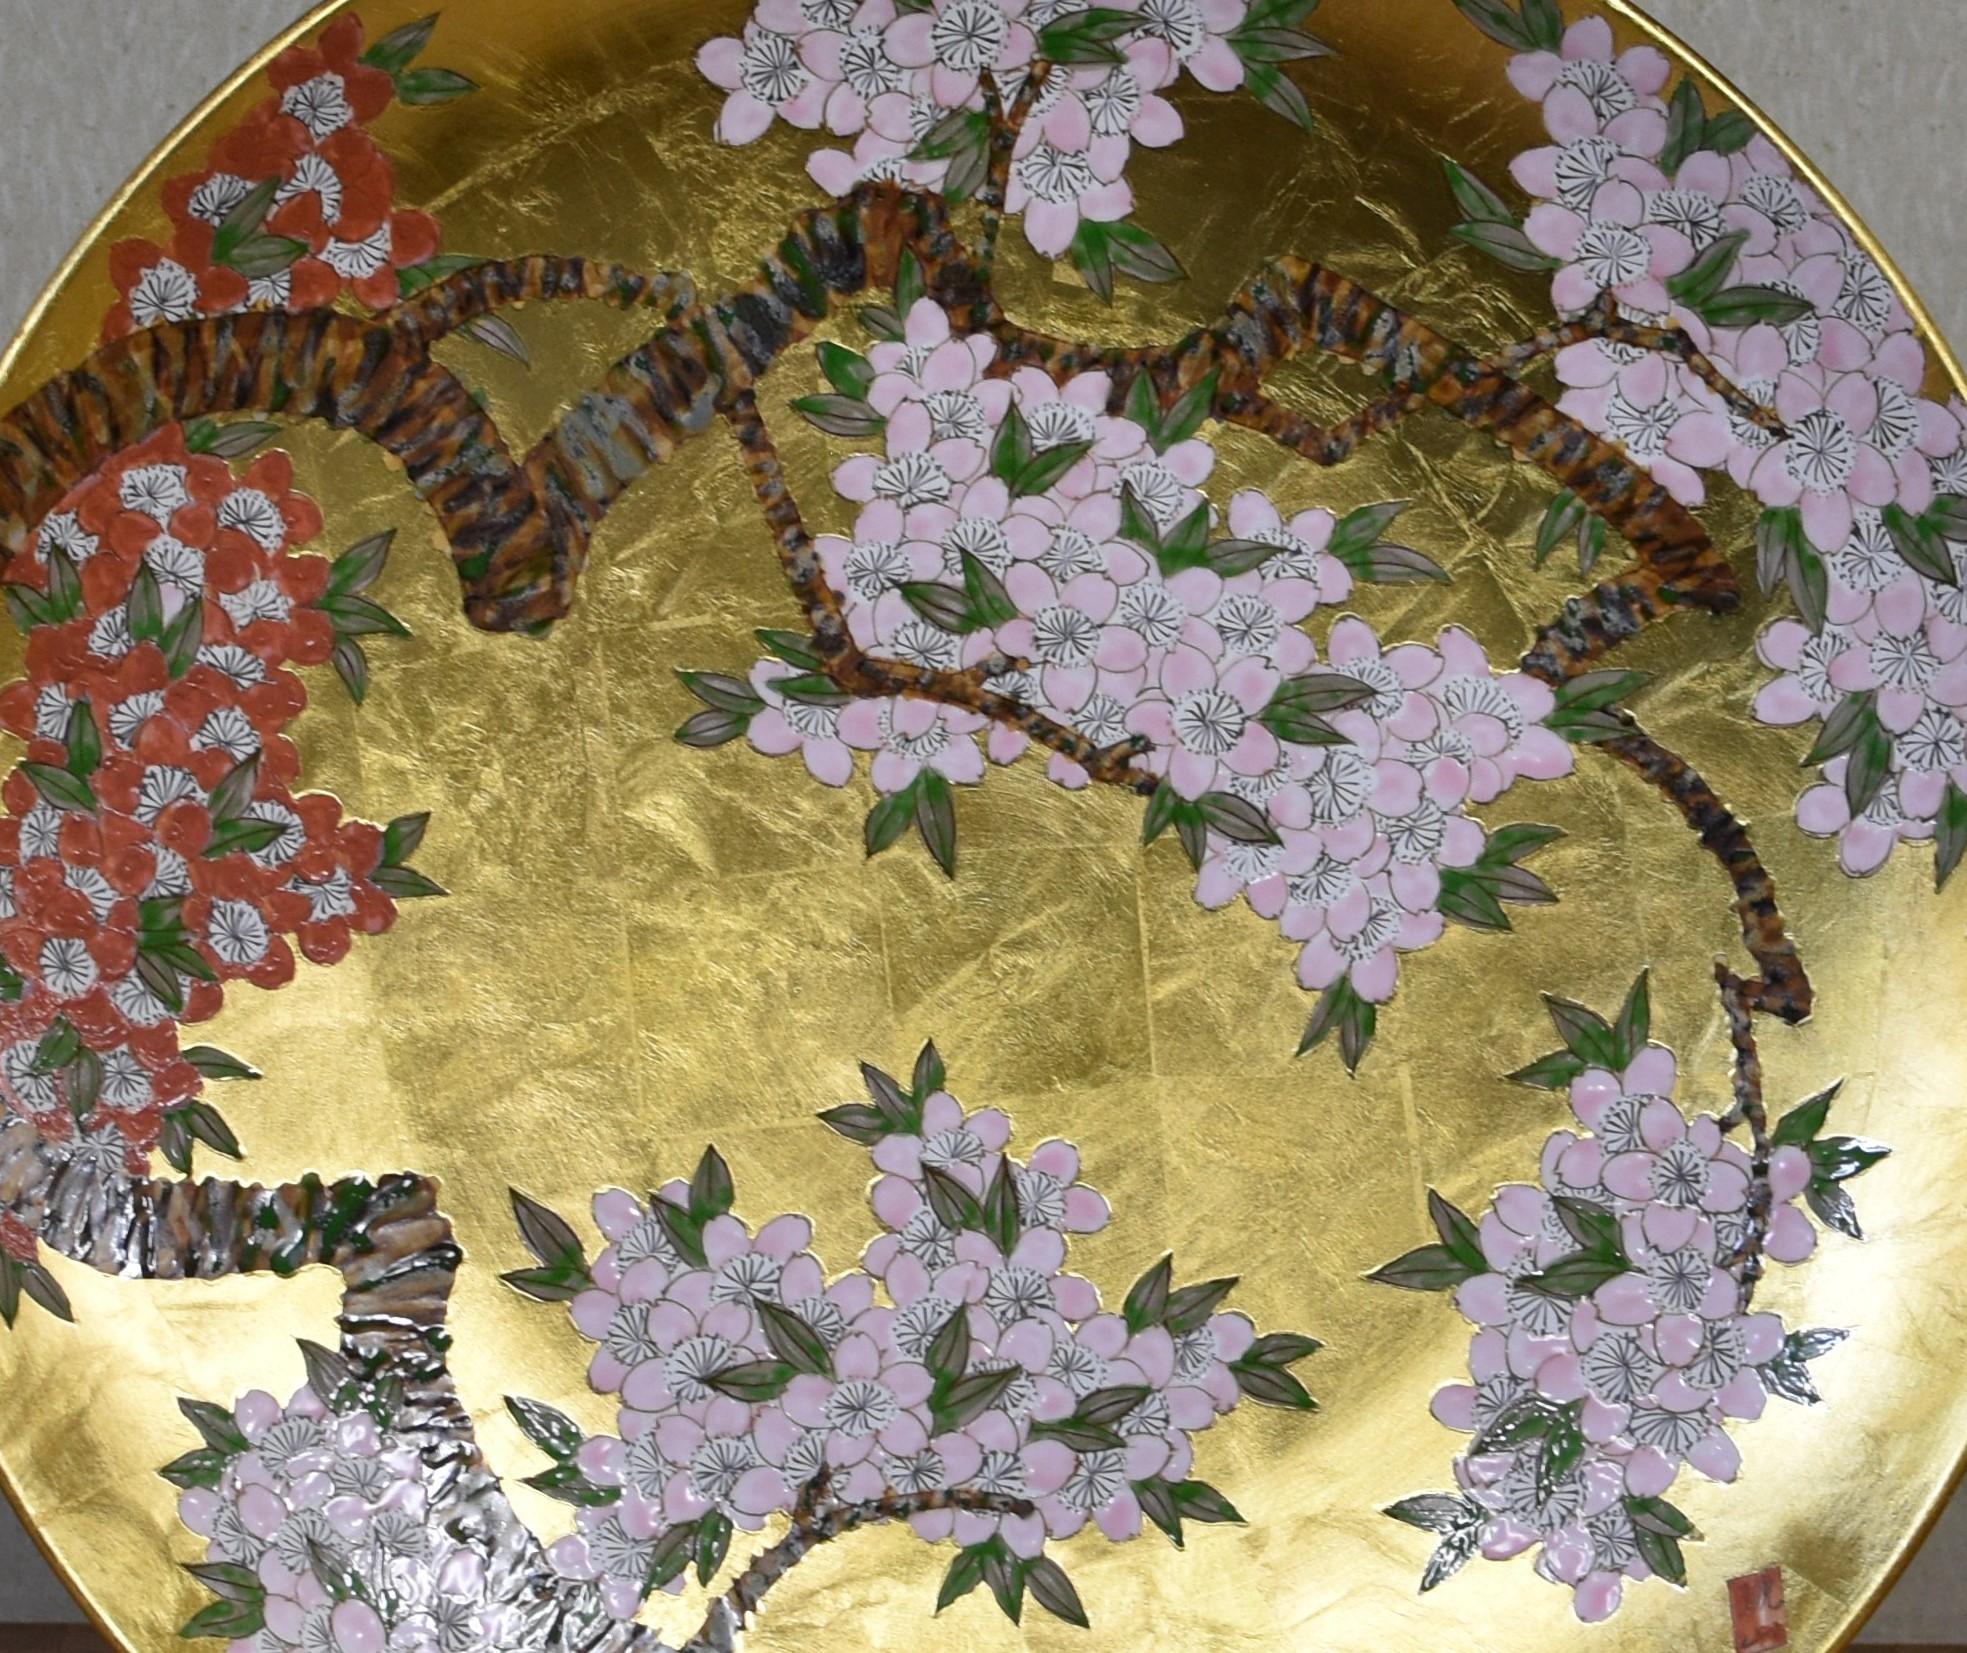 Exquisite large Japanese contemporary decorative porcelain charger intricately hand-painted showcasing clusters of cherry blossom in soft pink and red on graceful branches, set against a breathtaking gold leaf background. This is a masterpiece by a